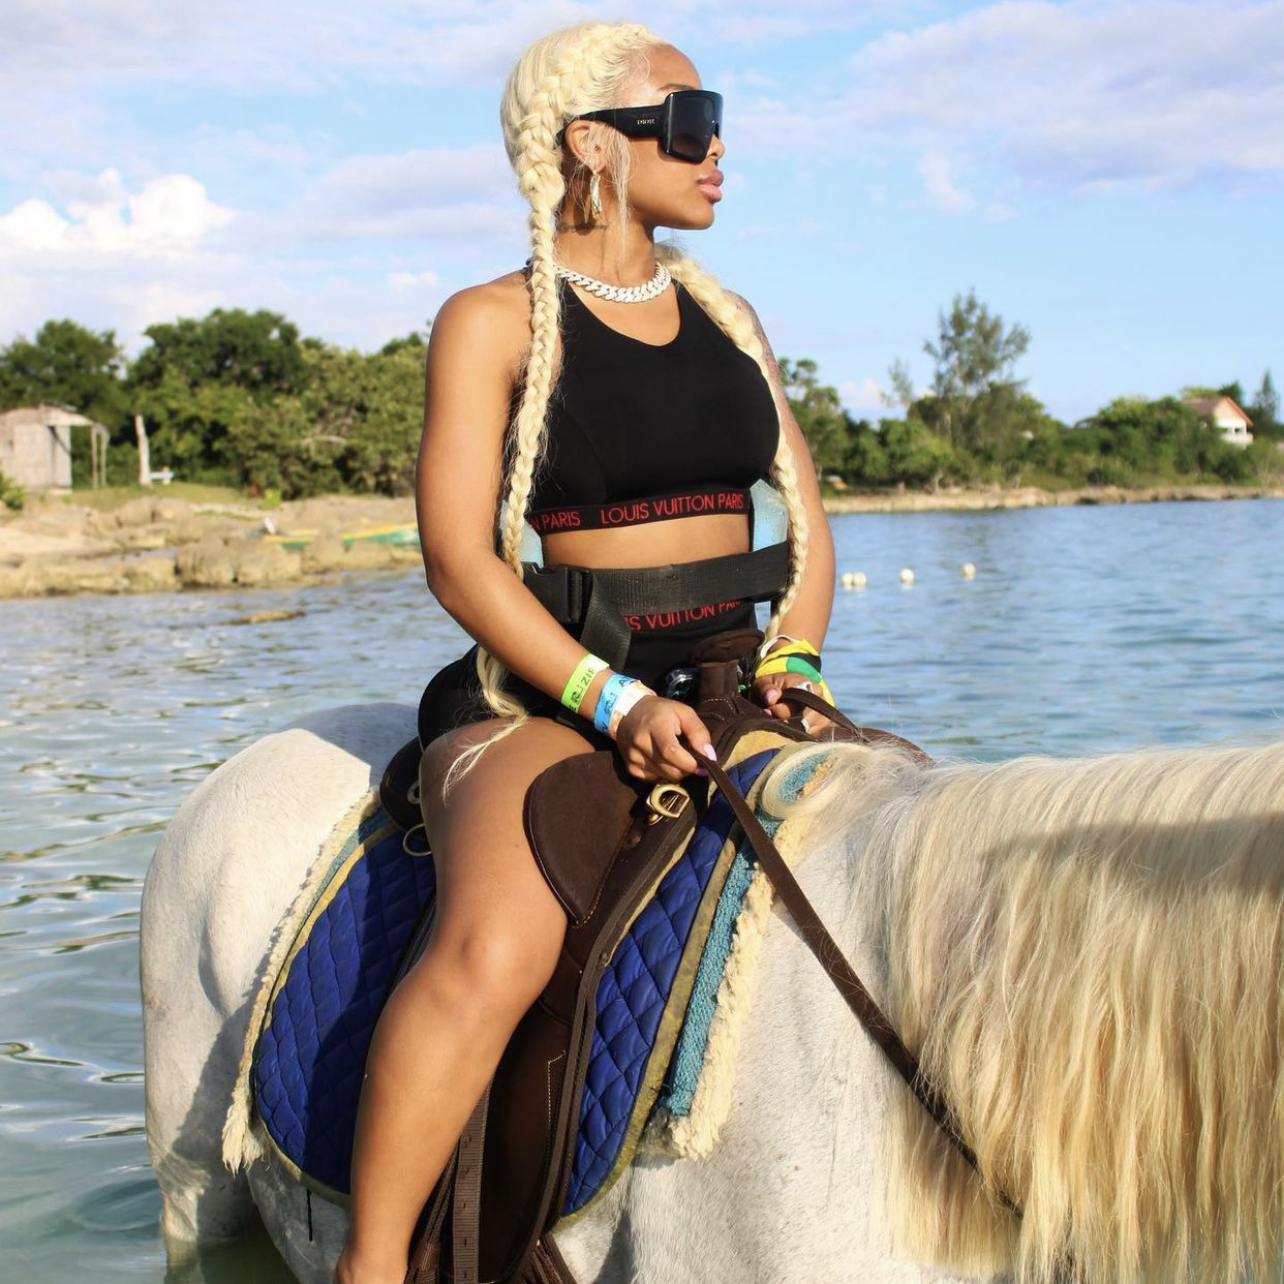 Jayda parties up a storm in Jamaica